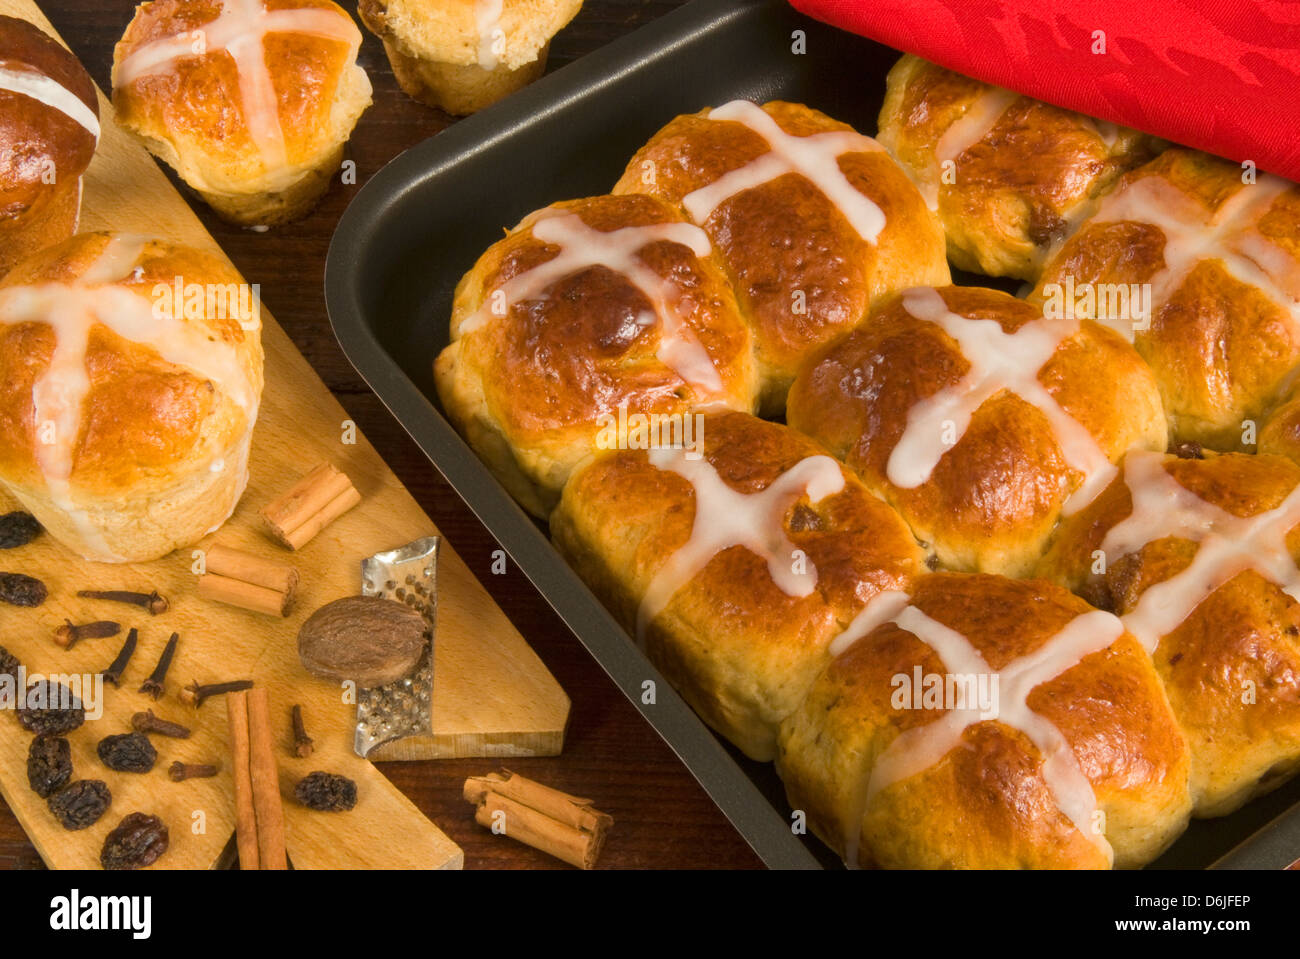 Hot cross buns in a baking tin, Easter speciality, United Kingdom, Europe Stock Photo